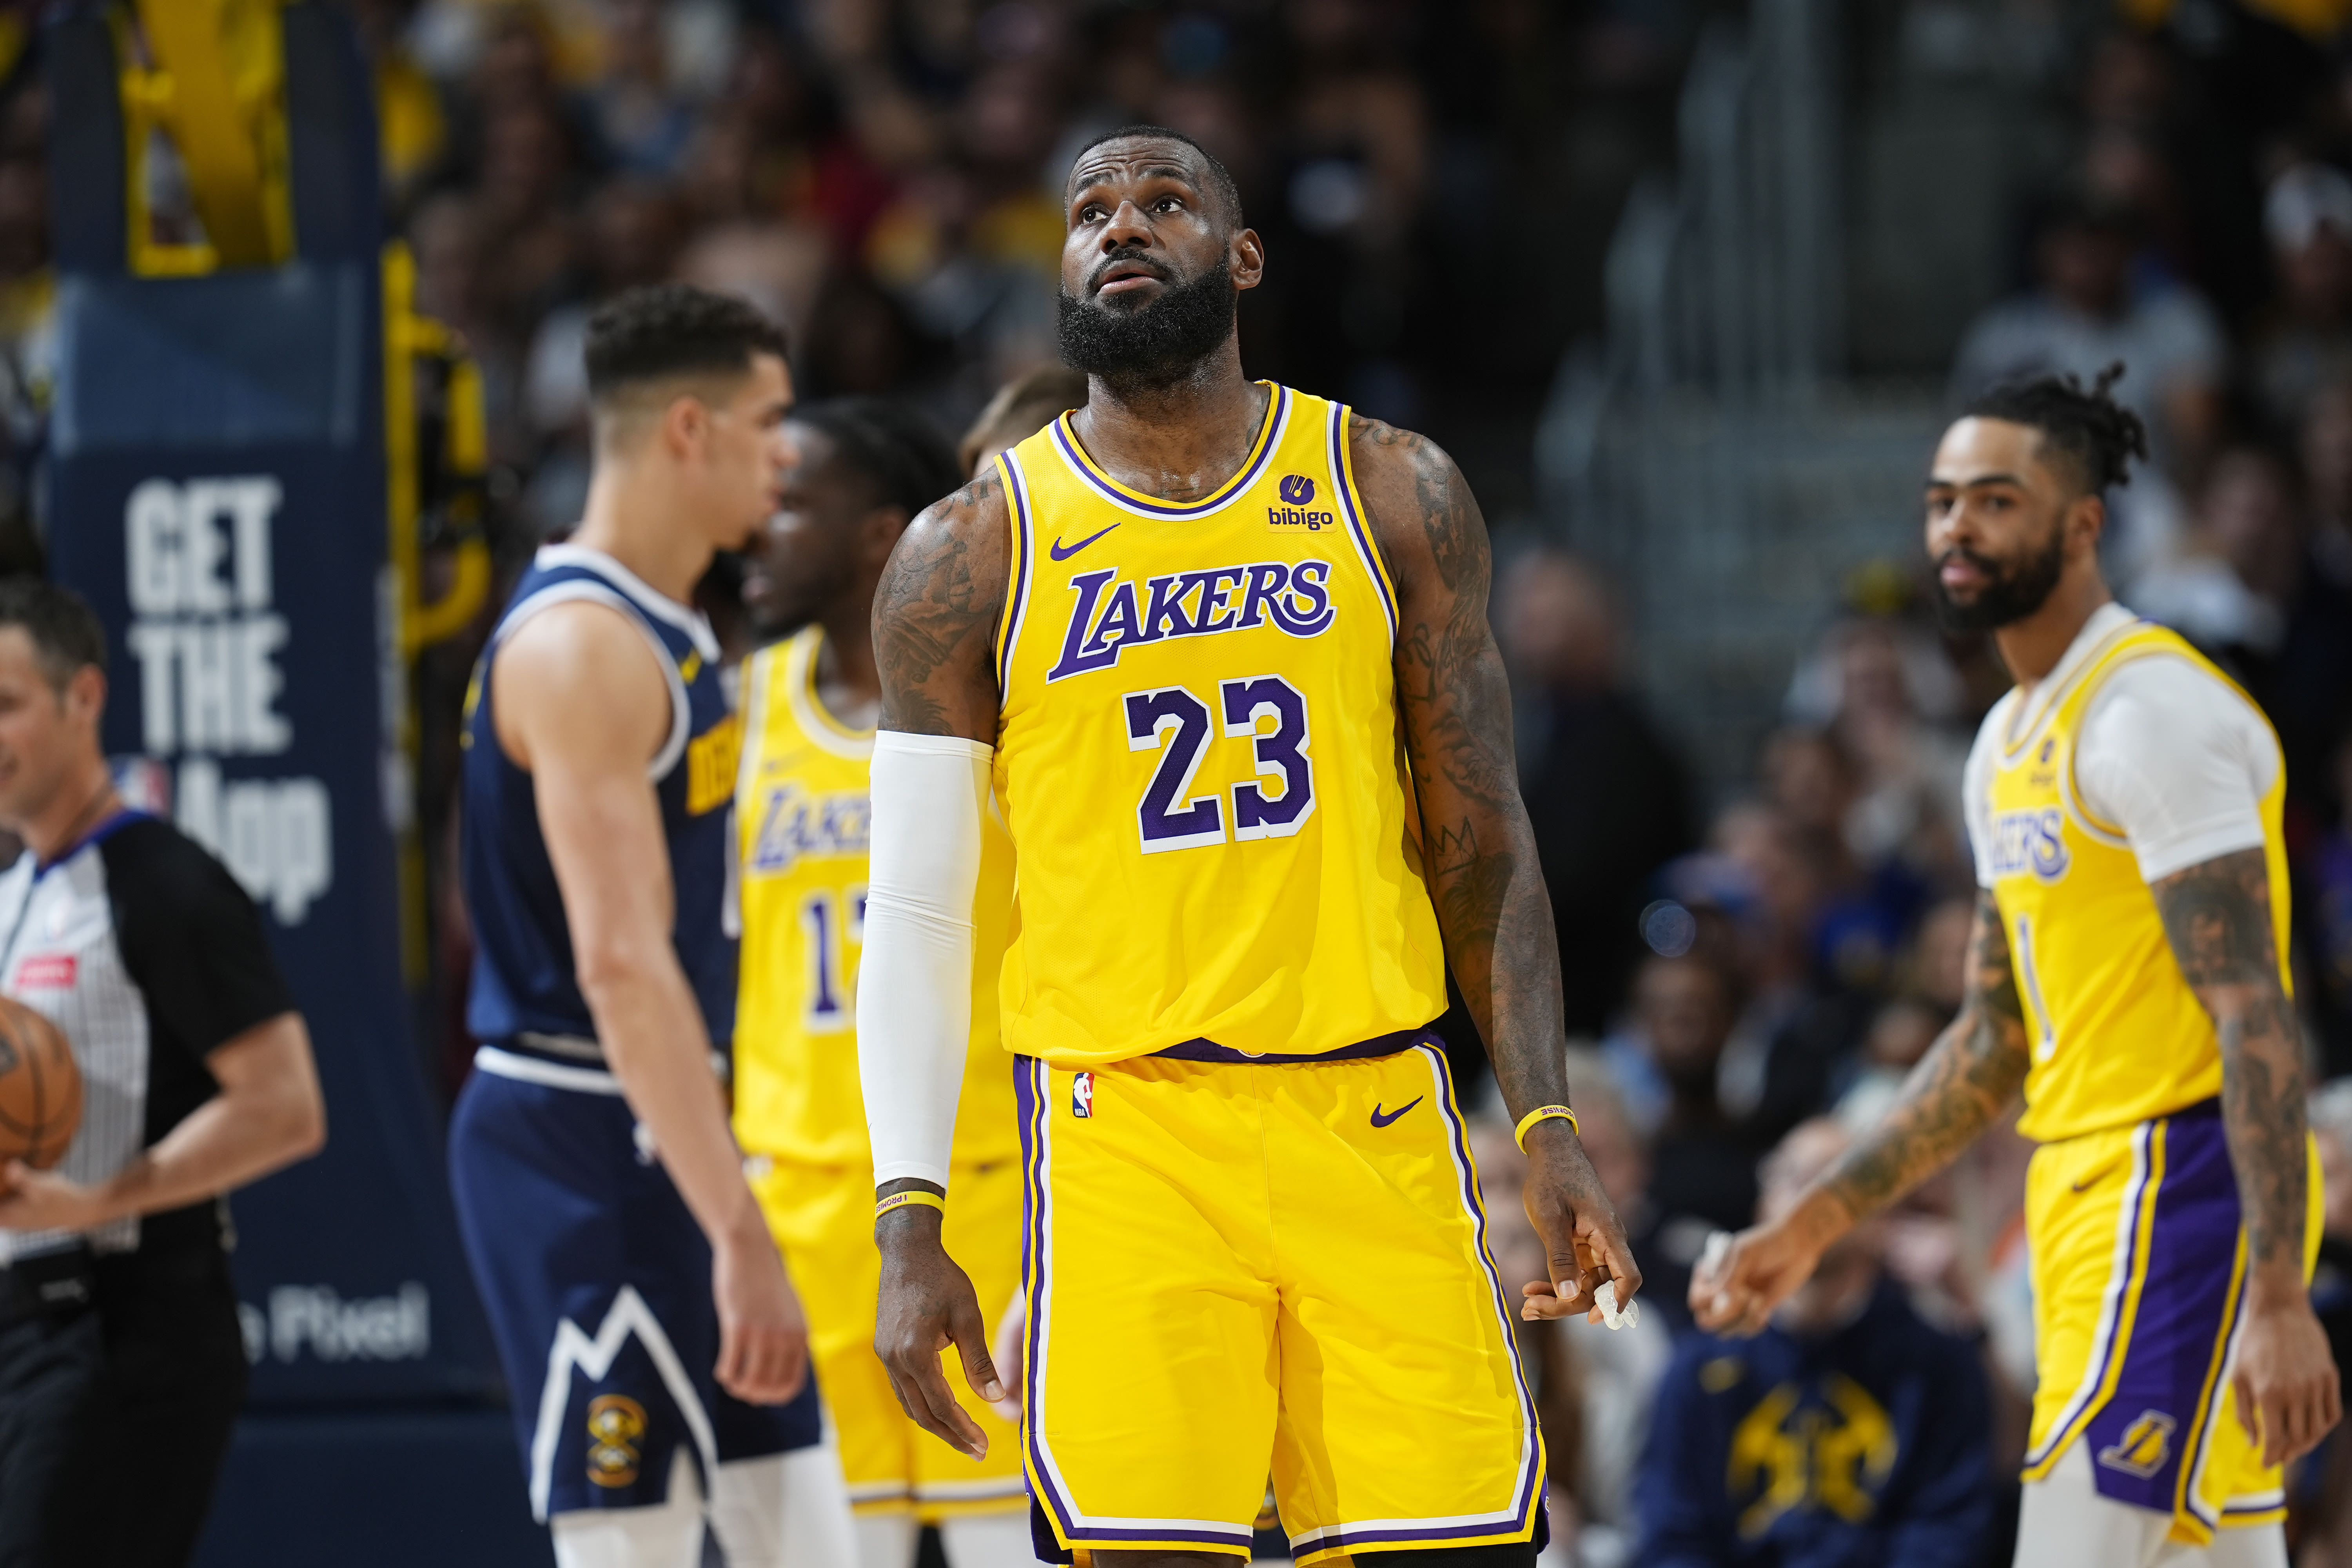 Plaschke: Lakers stuck in mediocre hell with no hope in sight after season-ending loss